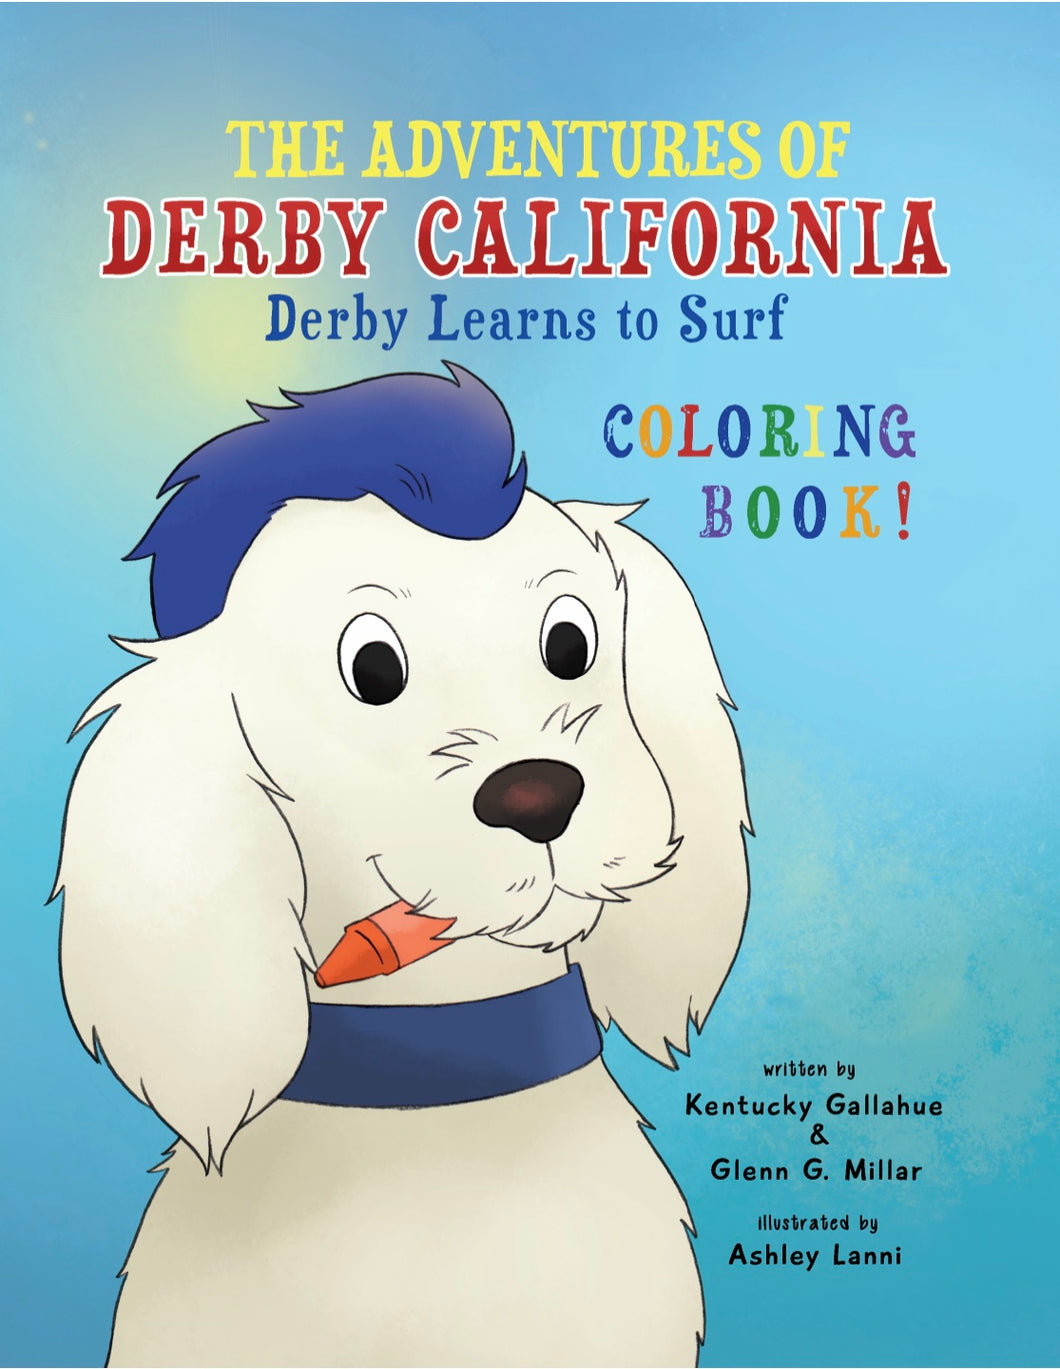 The Adventures of Derby California- COLORING BOOK!